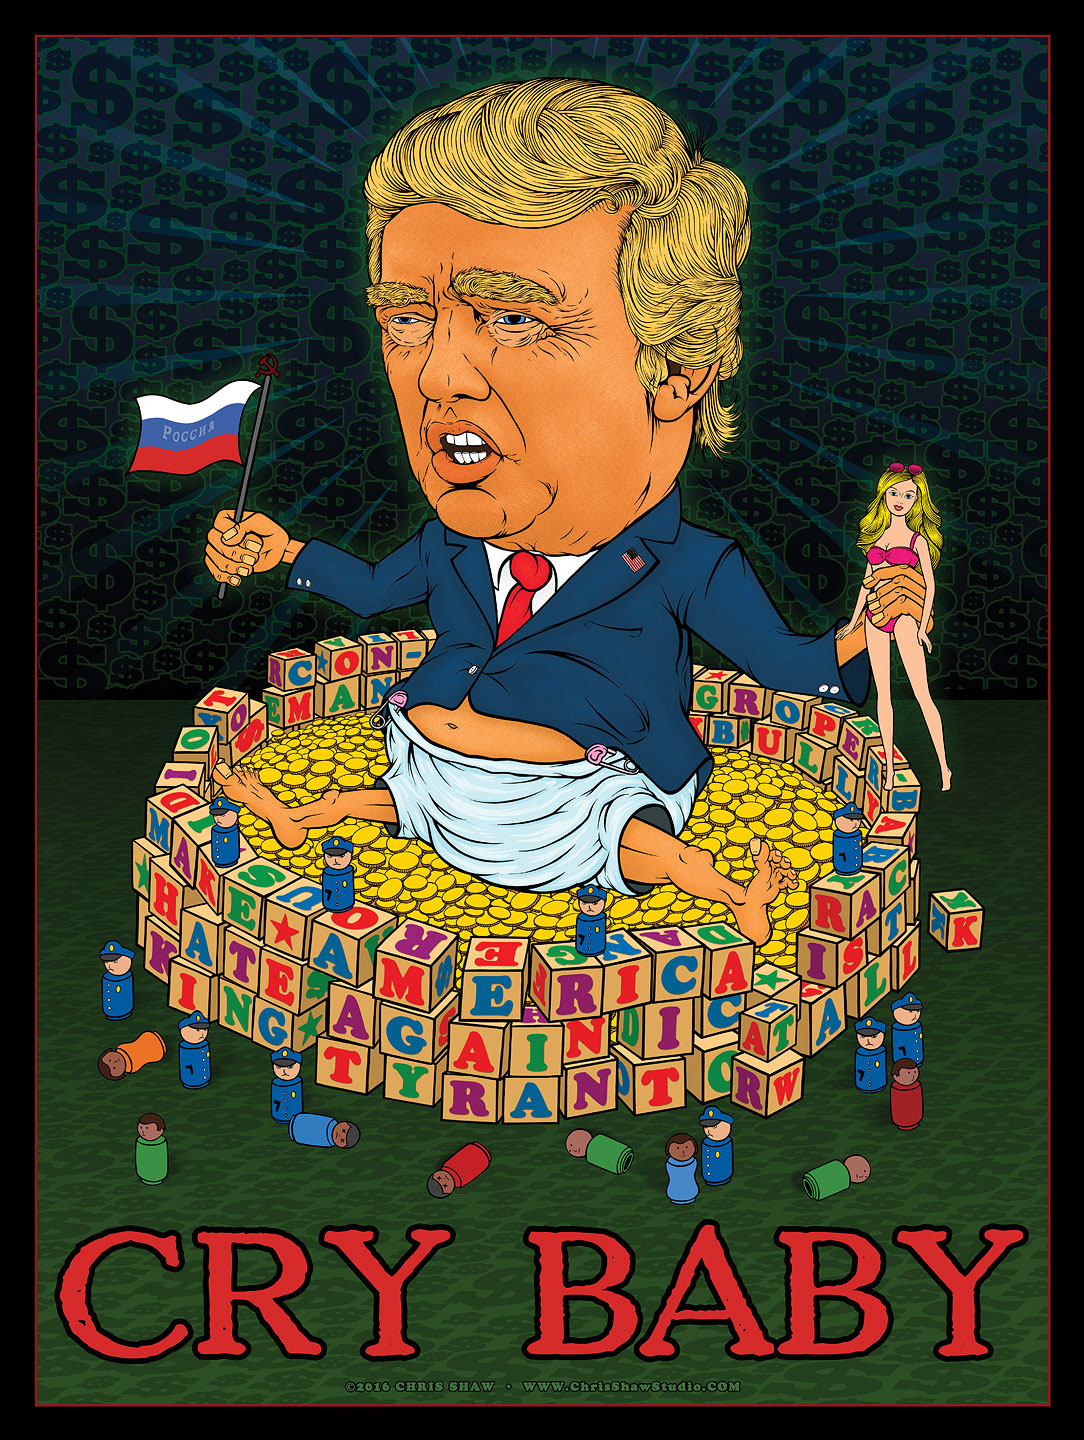 Donald Trump Cry Baby political poster by Chris Shaw, 2016